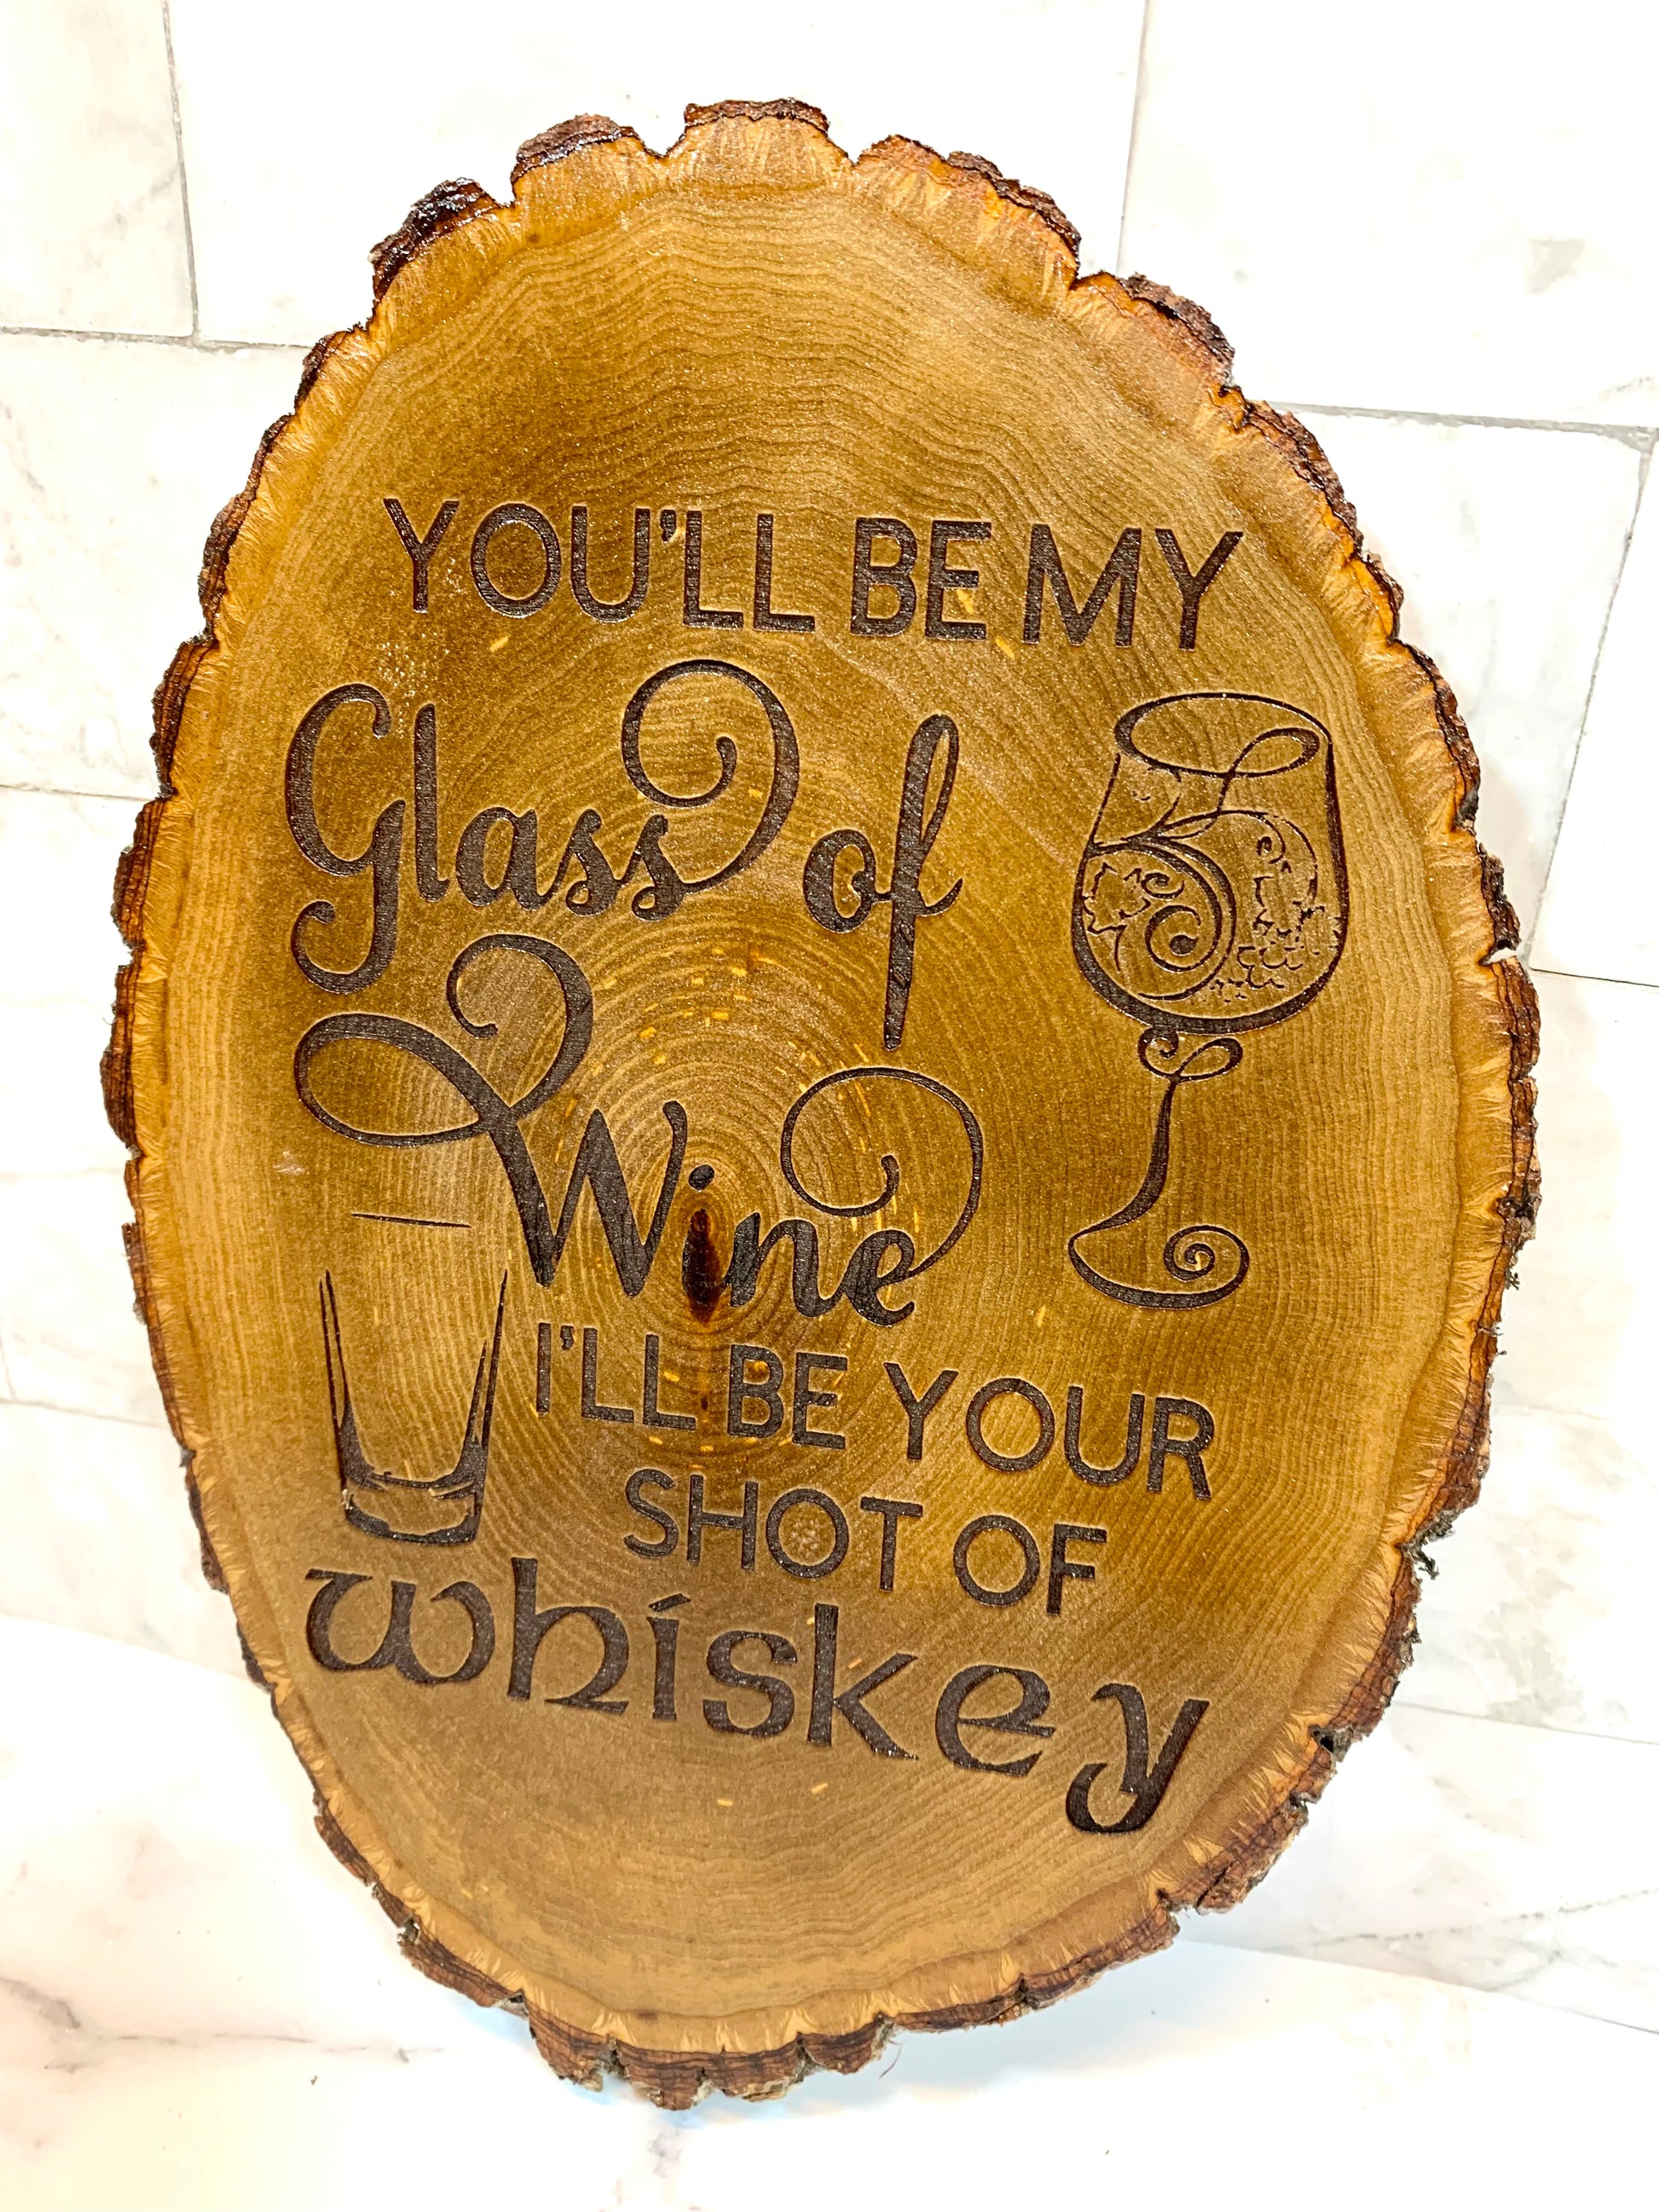 You’ll Be My Glass Of Wine I’ll Be Your Shot Of Whiskey Live Edge Wood Sign - MixMatched Creations